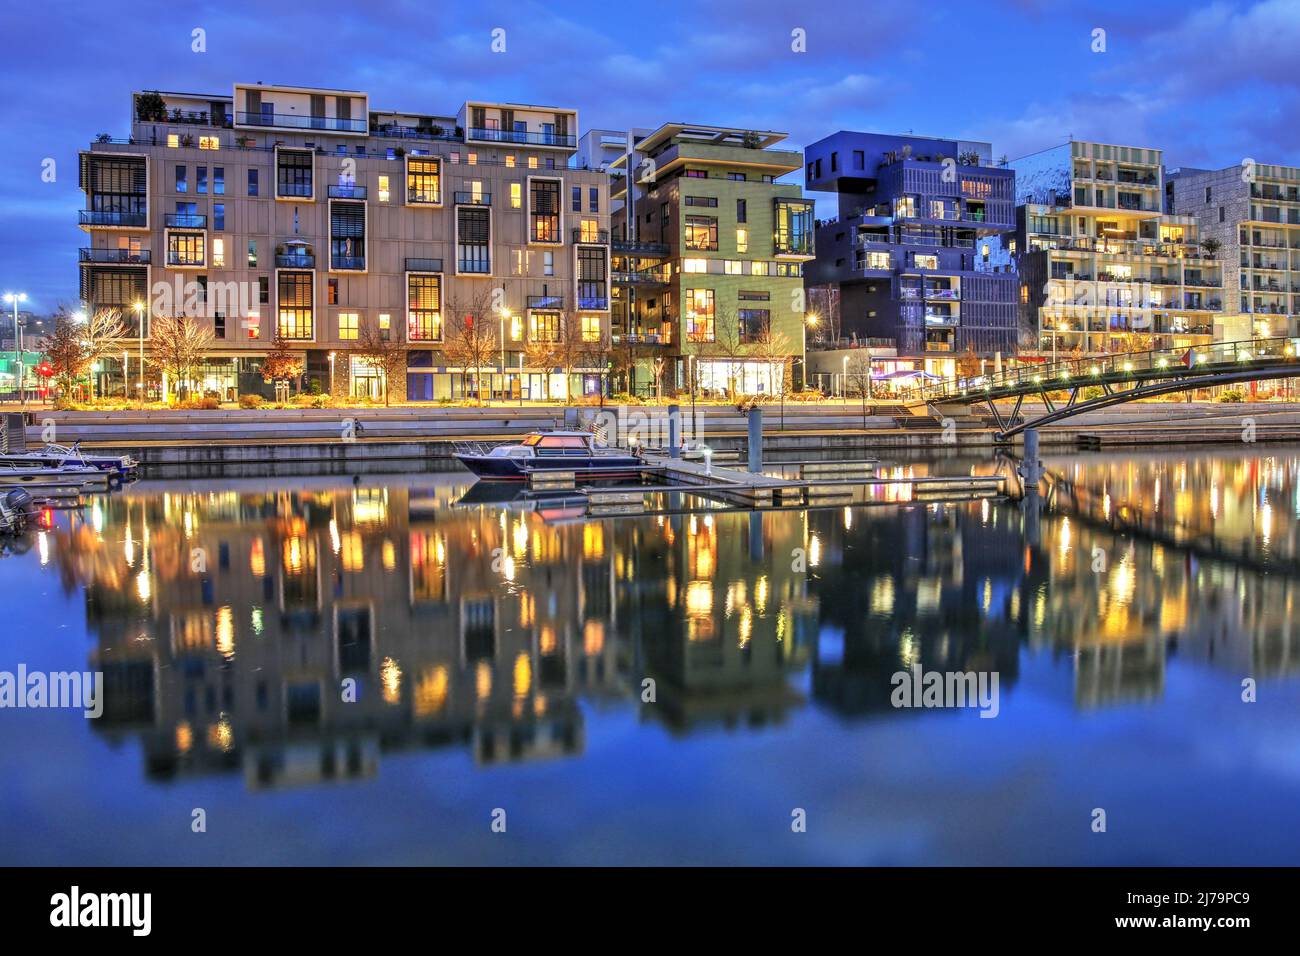 Night scene with modern residential buildings across a small canal in the post-modern district of La Confluence in Lyon, France Stock Photo